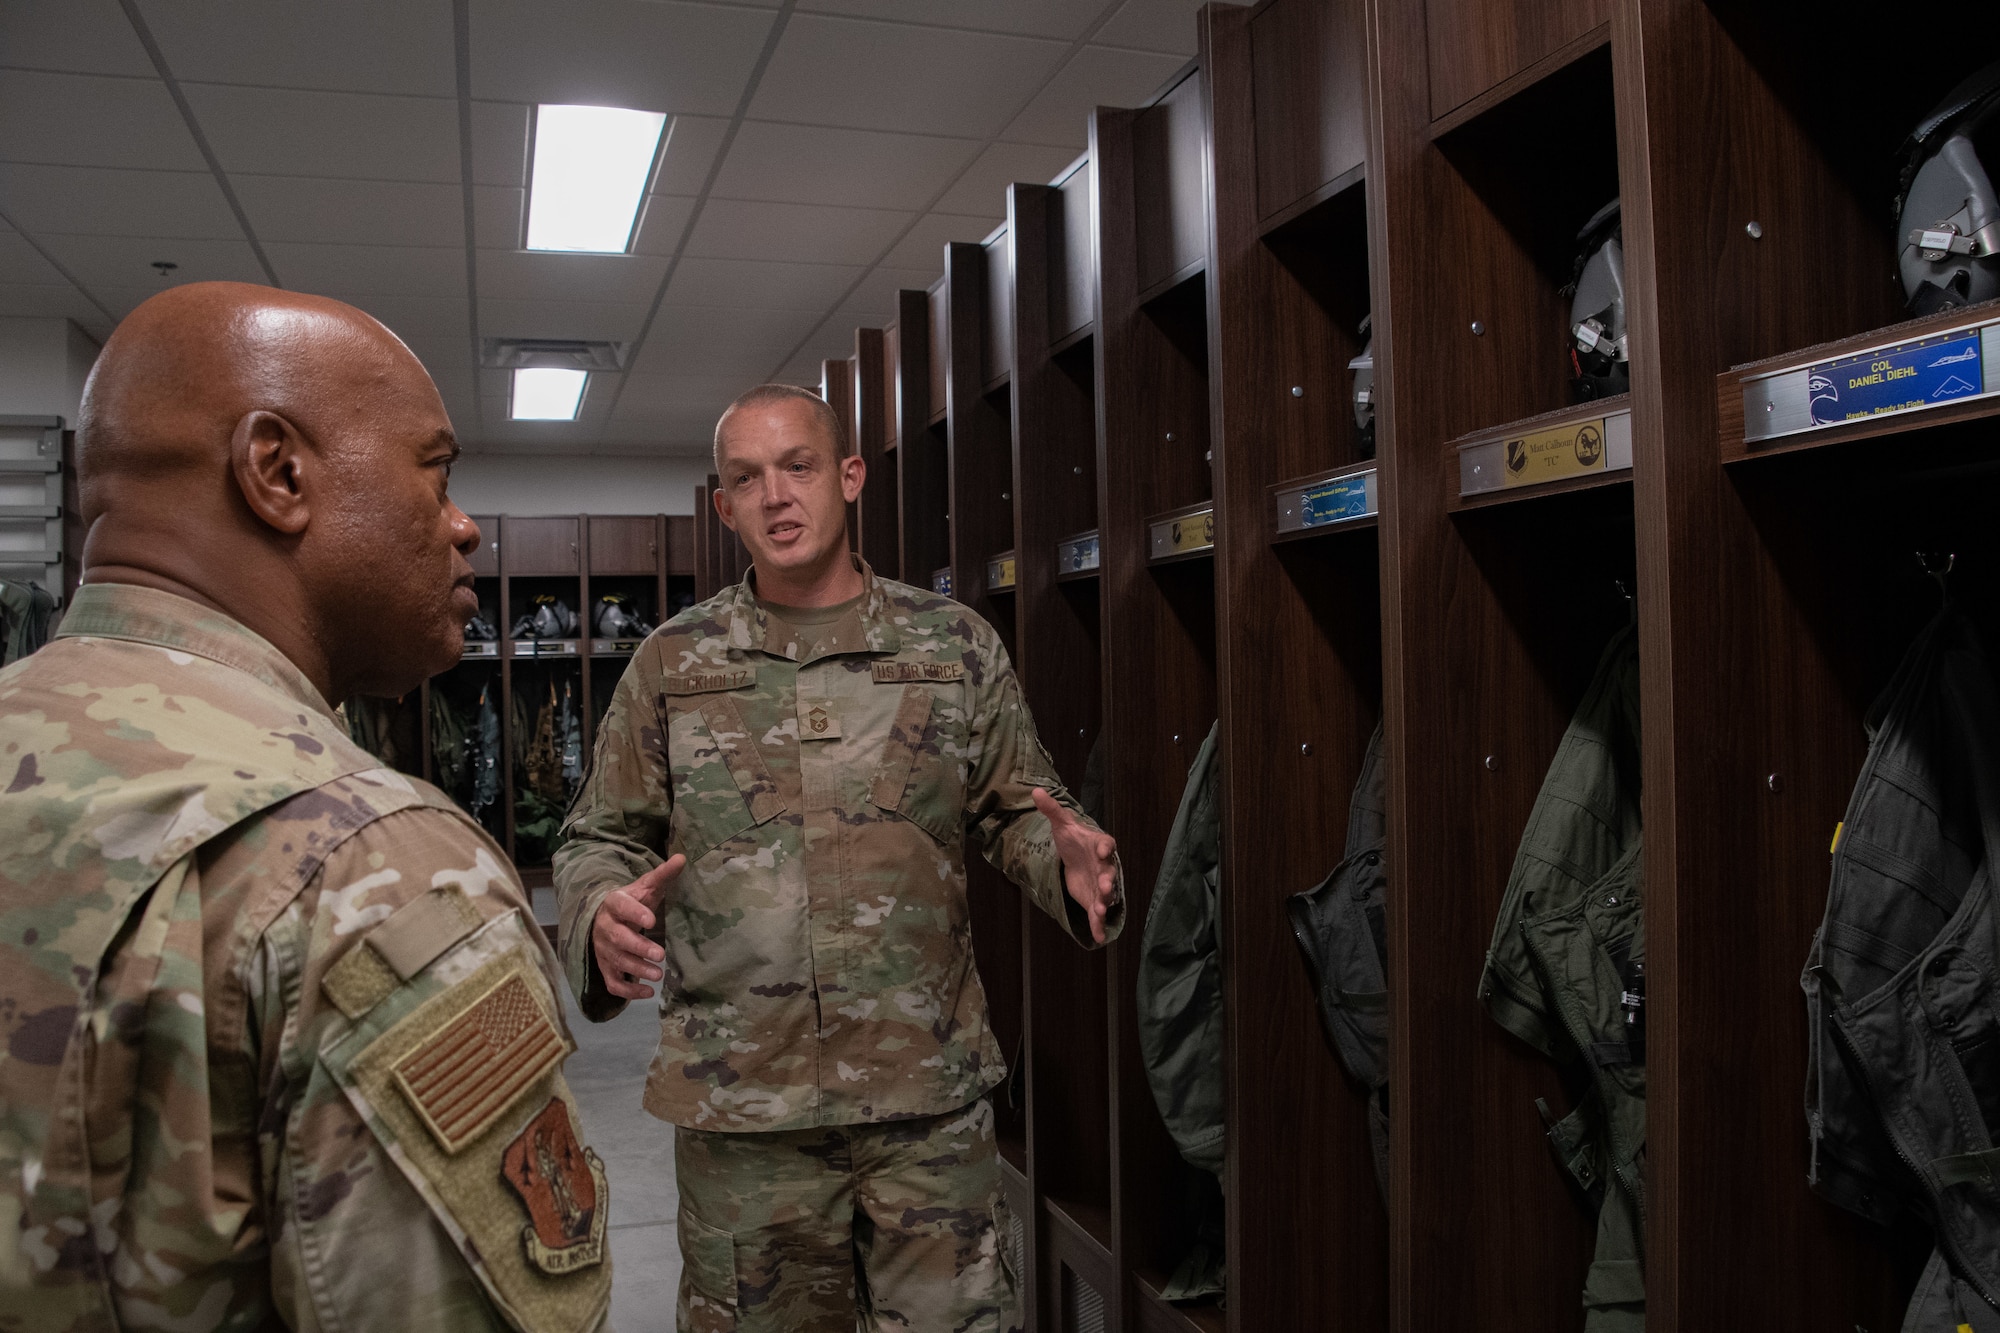 U.S. Air Force Senior Master Sgt. Joshua Buckholtz, 131st Operational Support Squadron aircrew flight equipment (AFE) superintendent, explains how the professionalism of AFE Airmen is a force multiplier for B-2 operations to U.S. Air Force Senior Enlisted Advisor Tony L. Whitehead, the senior enlisted advisor to the chief of the National Guard Bureau at Whiteman Air Force Base, Missouri, Aug. 30, 2022. Whitehead visited the base to learn how National Guard Soldiers and Airmen contribute to state and national mission success. (U.S. Air National Guard photo by Airman 1st Class Phoenix Lietch)